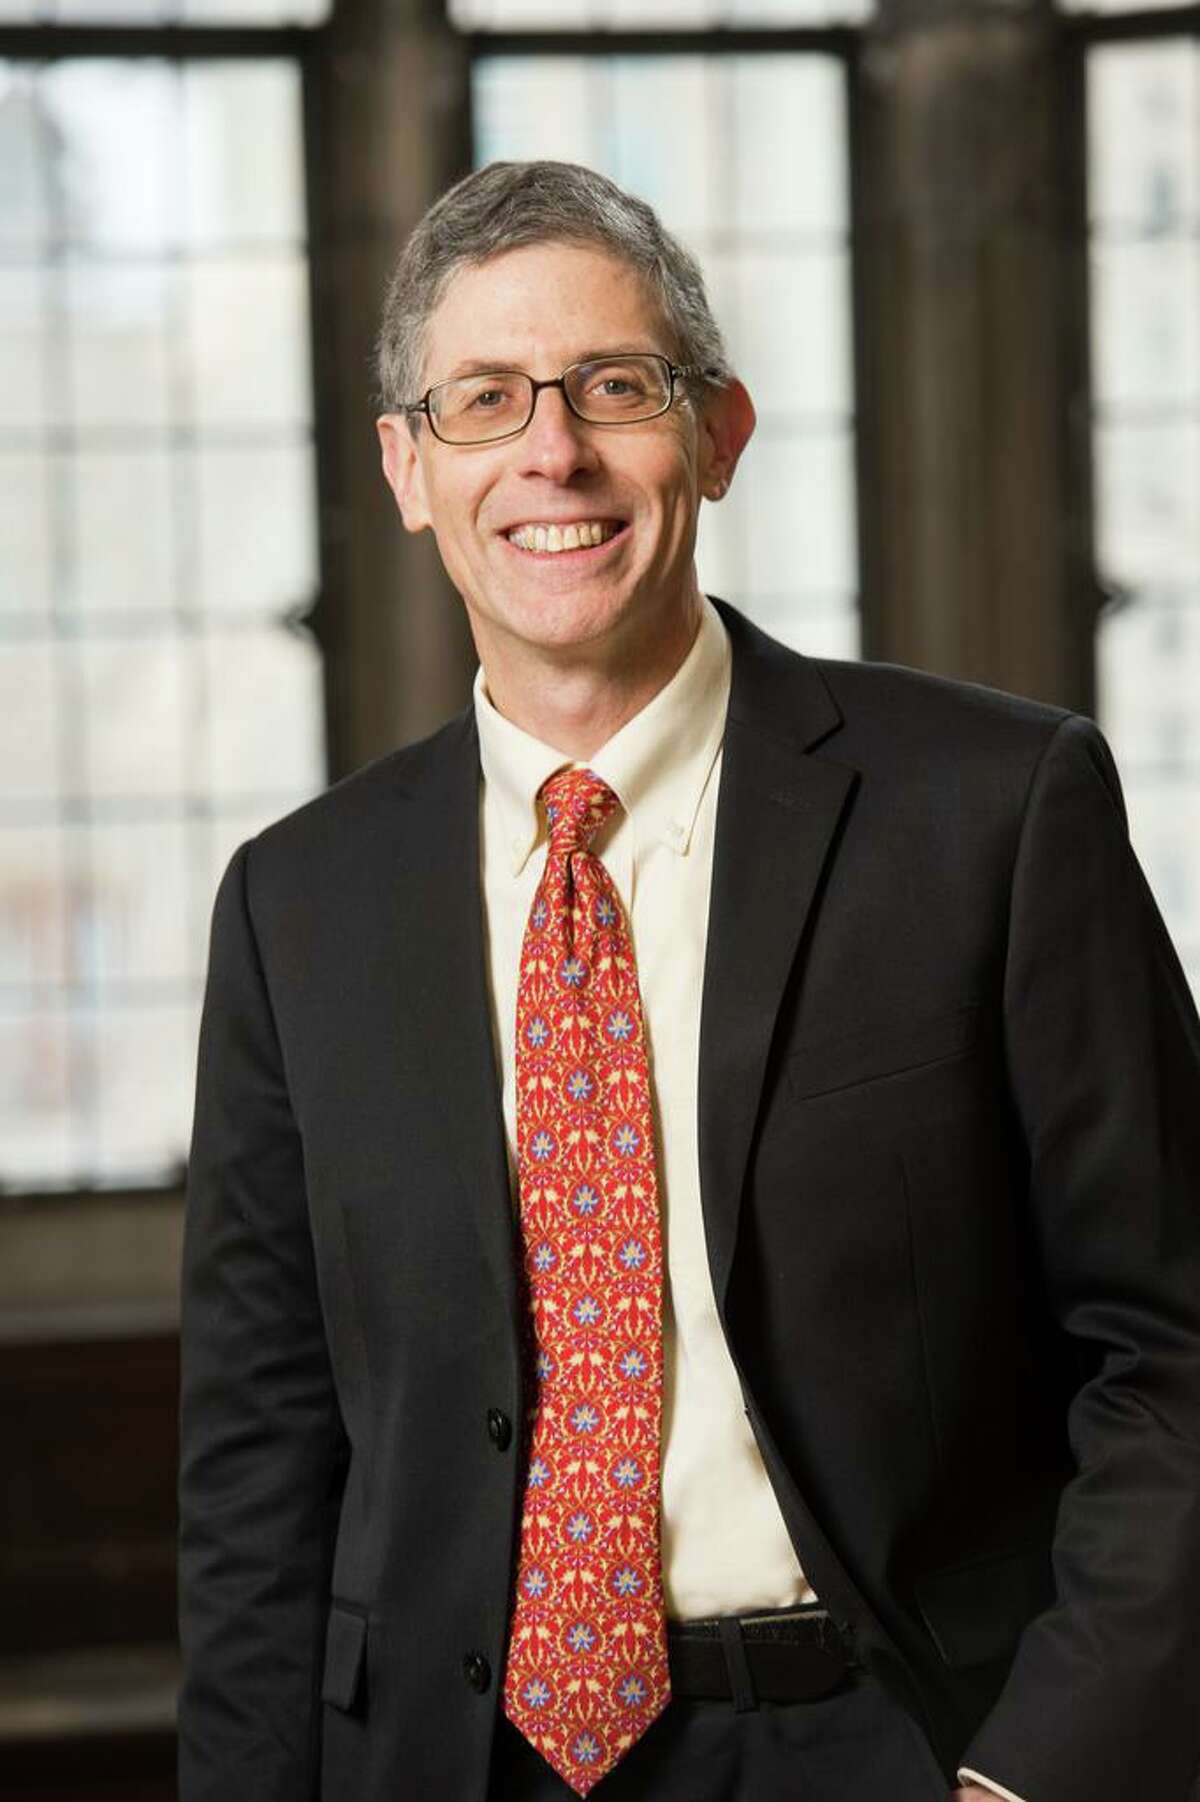 Jon Bauer is a law Professor at the University Of Connecticut.